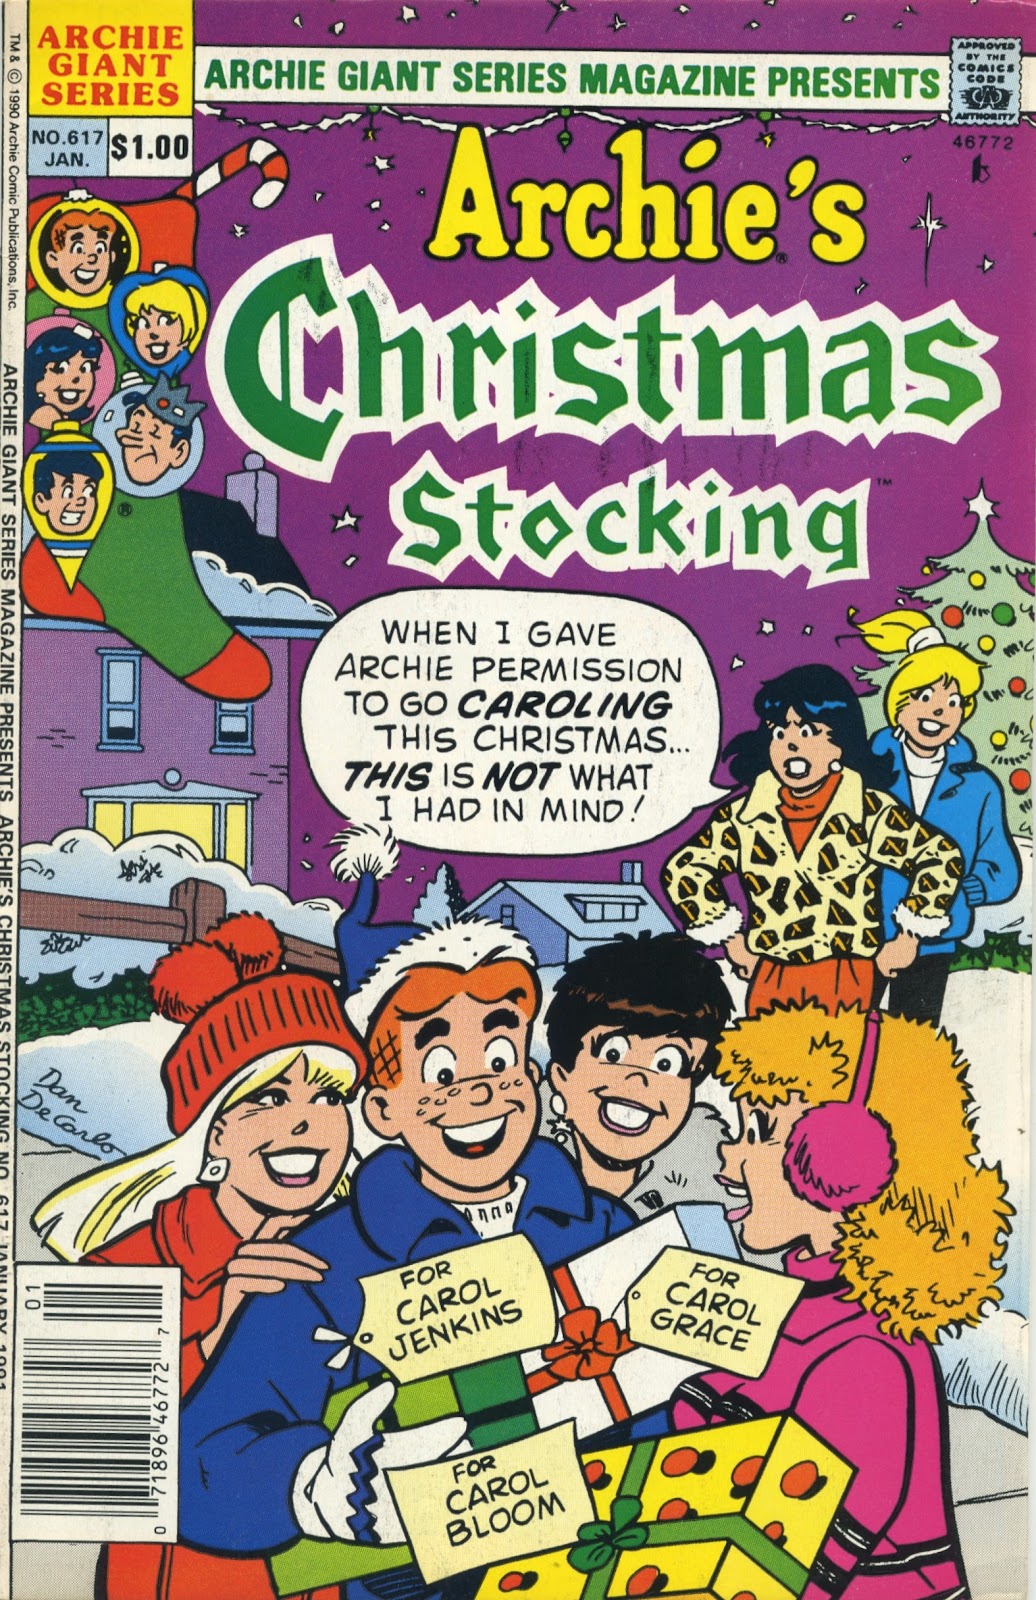 Archie Giant Series Magazine 617 Page 1